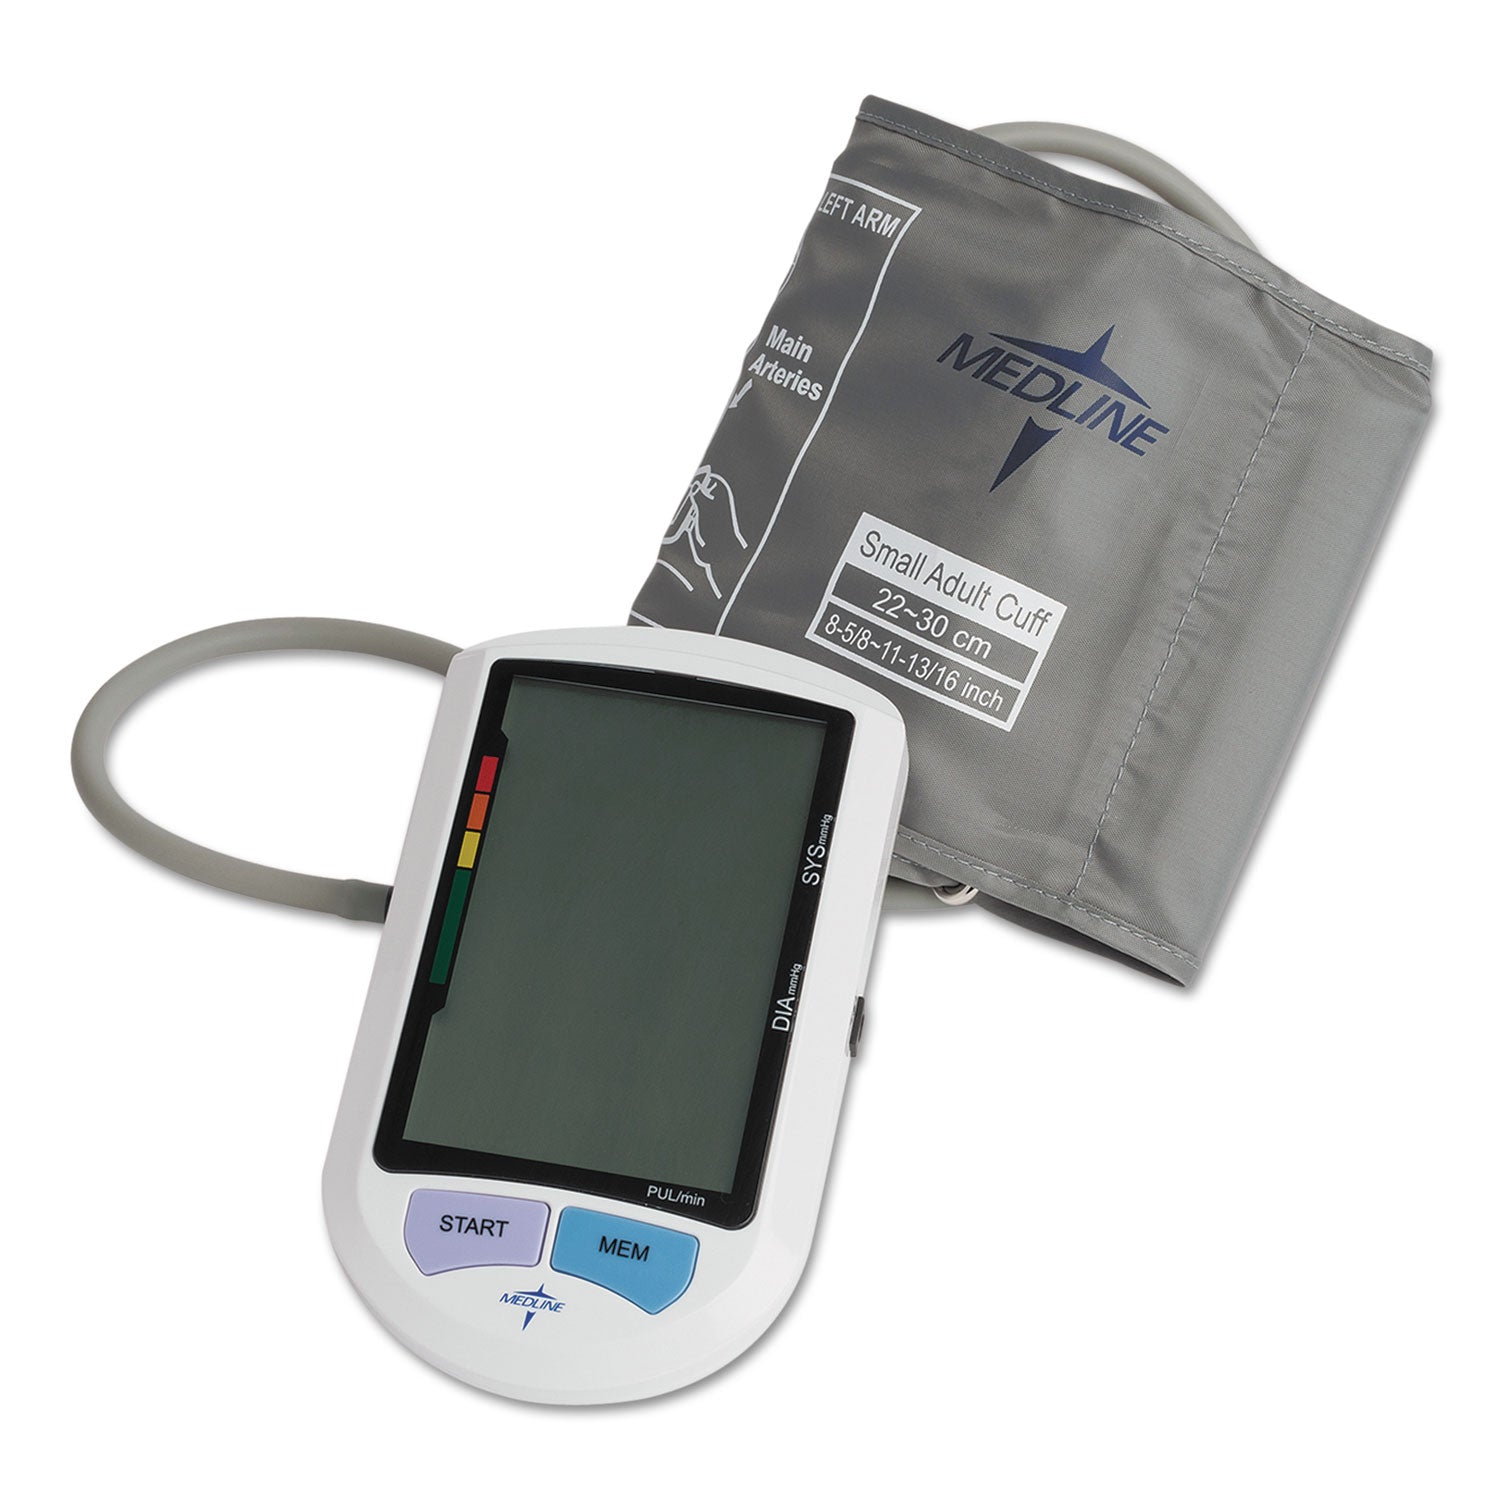 Automatic Digital Upper Arm Blood Pressure Monitor, Small Adult Size - 